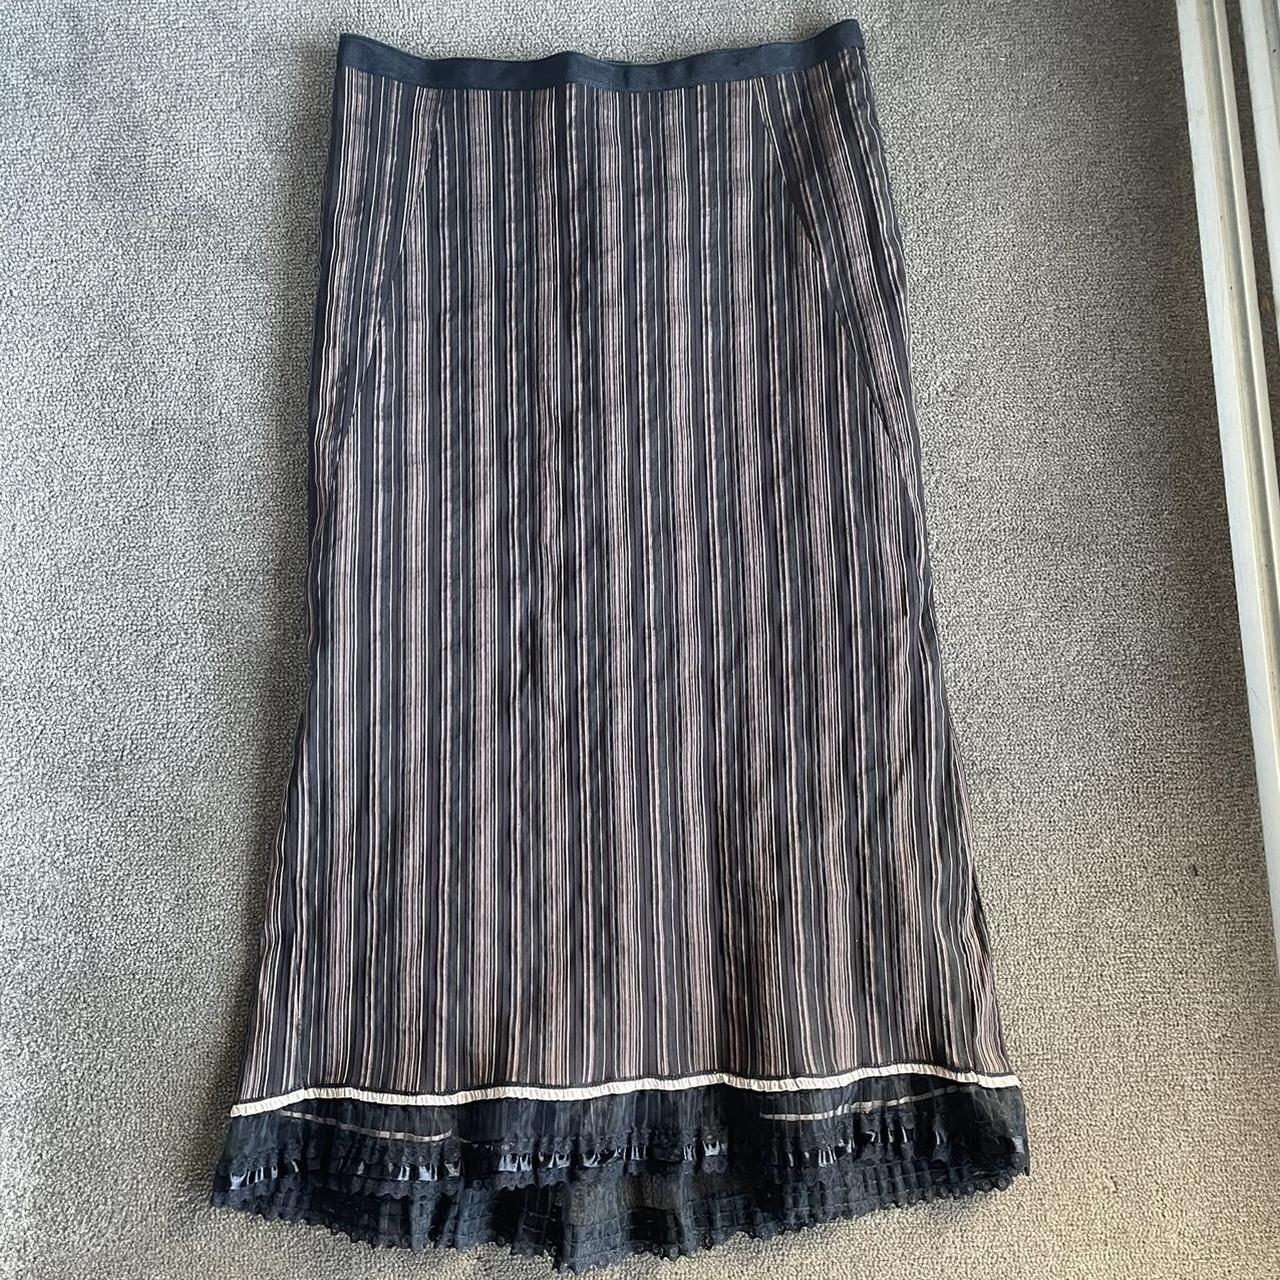 Ping pong midi skirt - some wear at the closure... - Depop